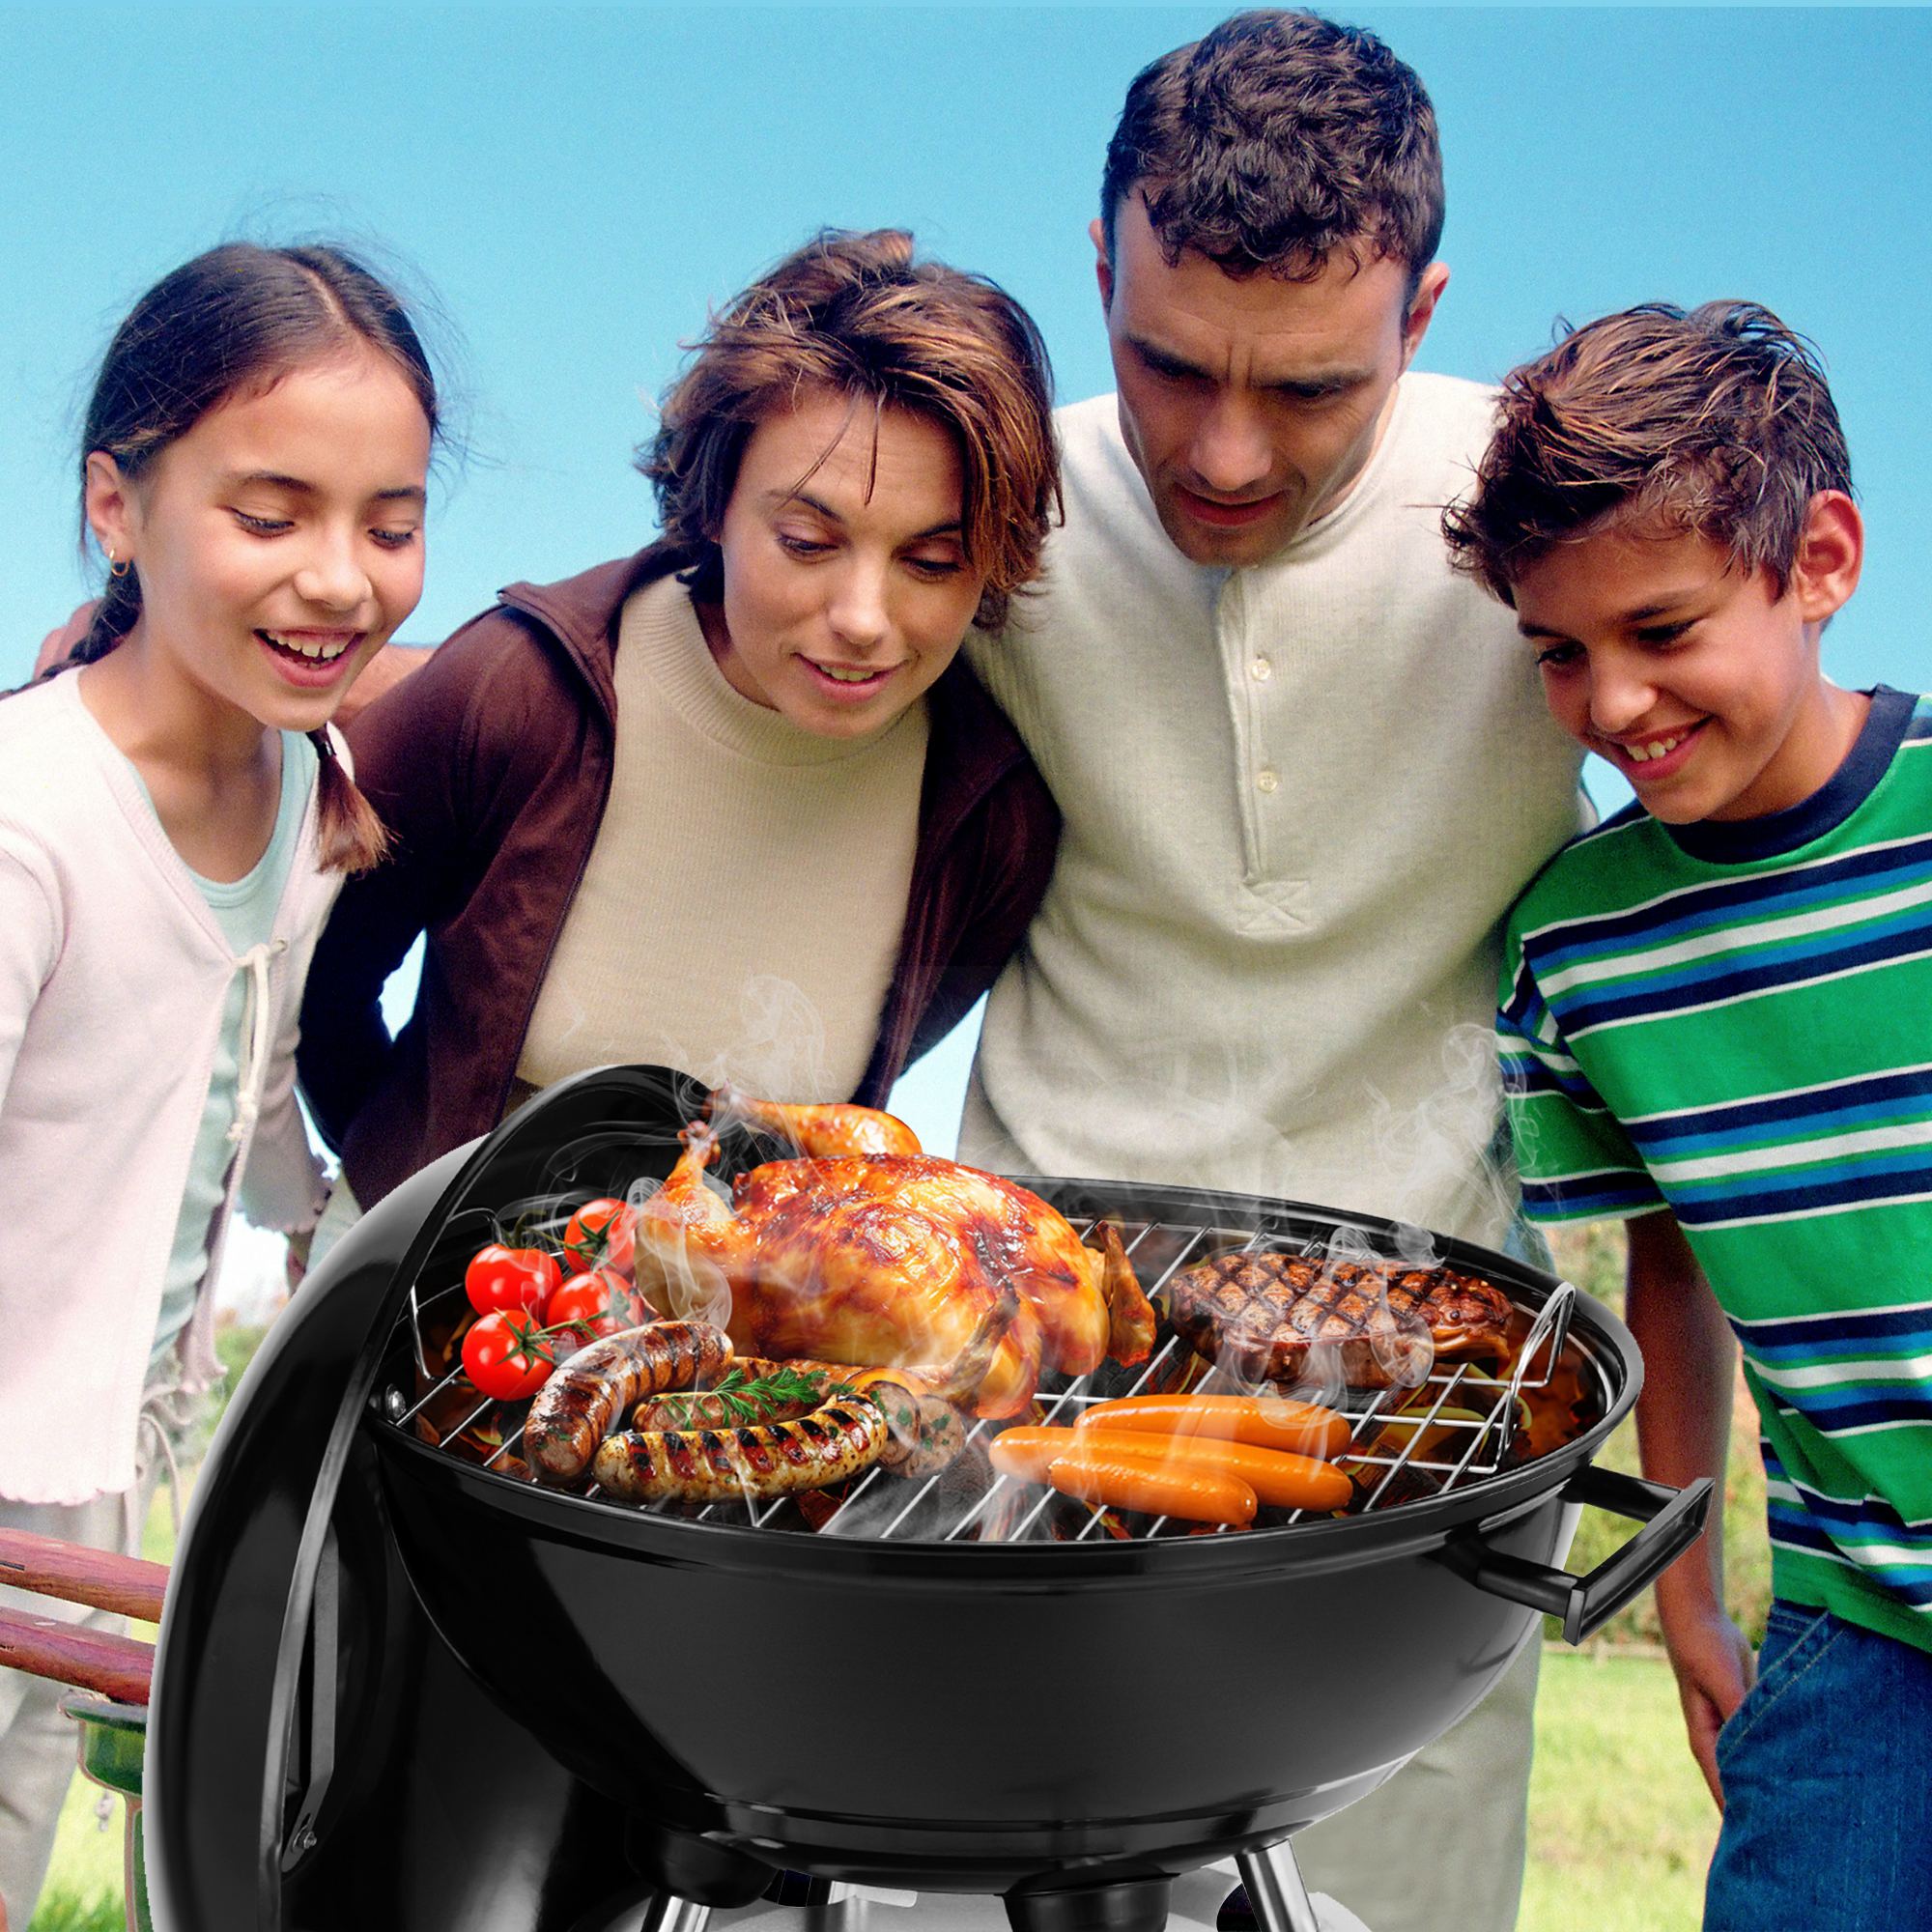 Segmart Kettle Charcoal Grill, 18 Inch Portable Camping BBQ Grill with Wheels for Outdoor Cooking Picnic Barbecue, Black - image 5 of 11